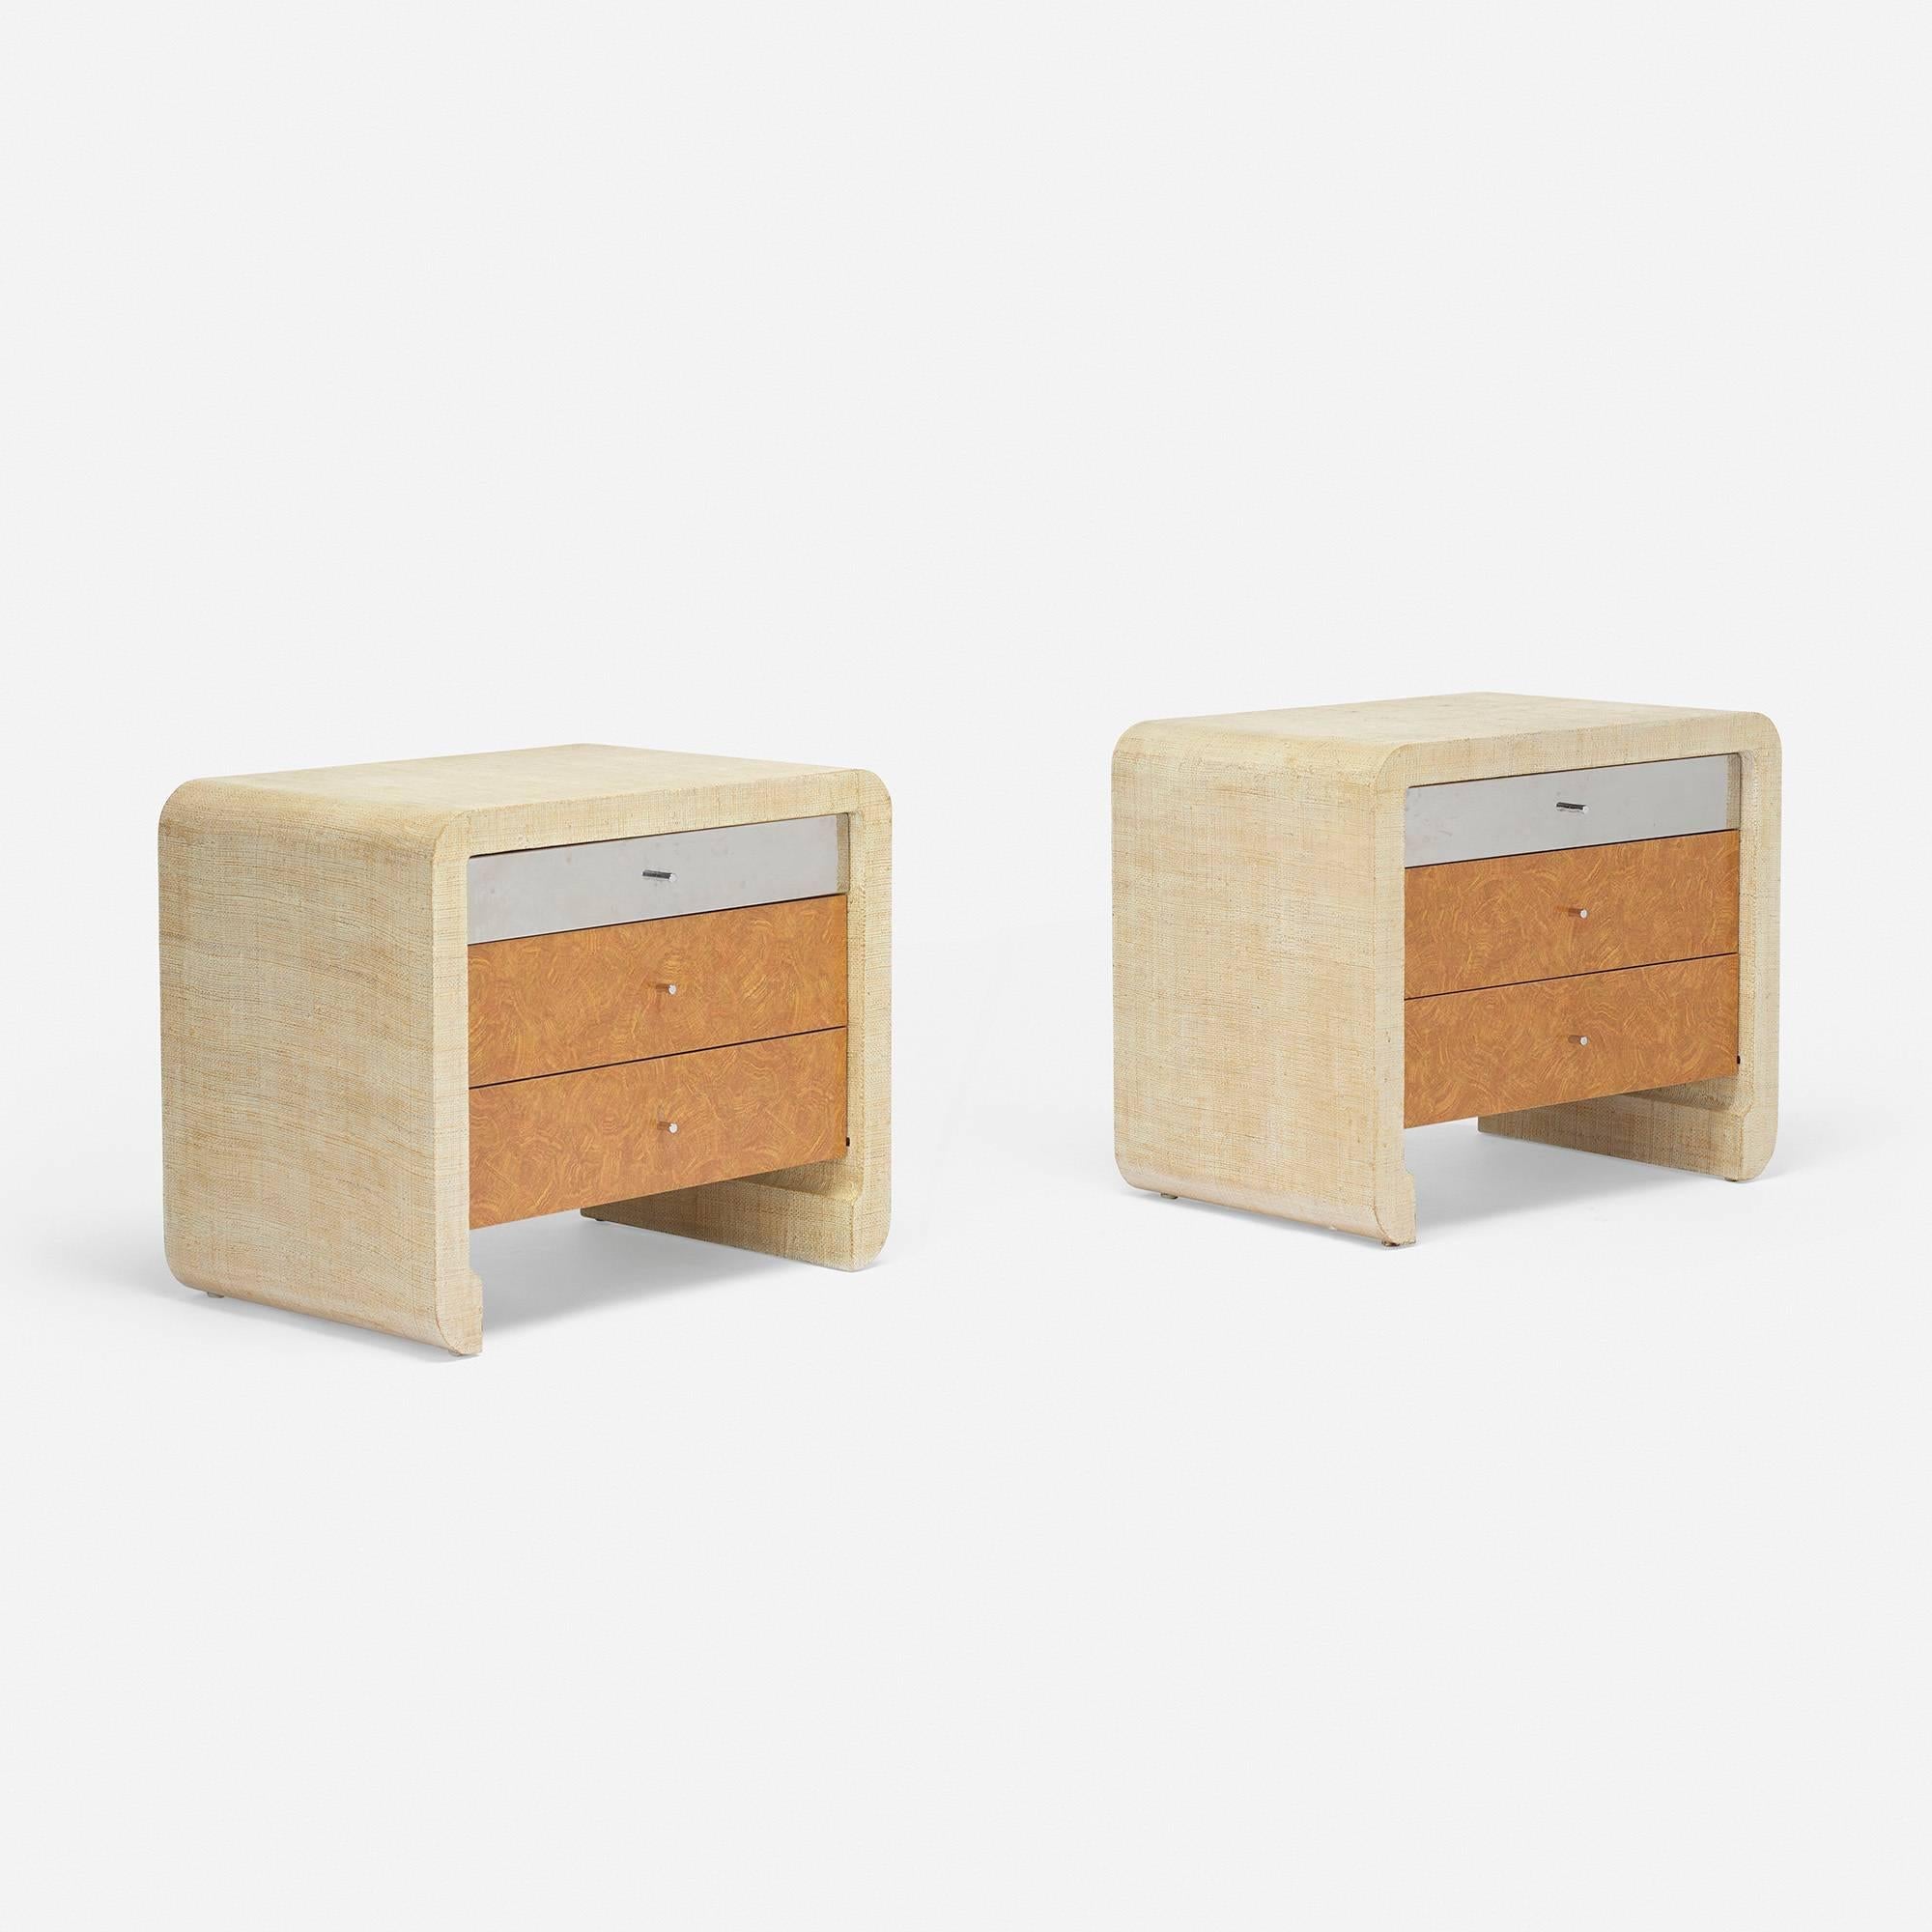 Each nightstand features three drawers.